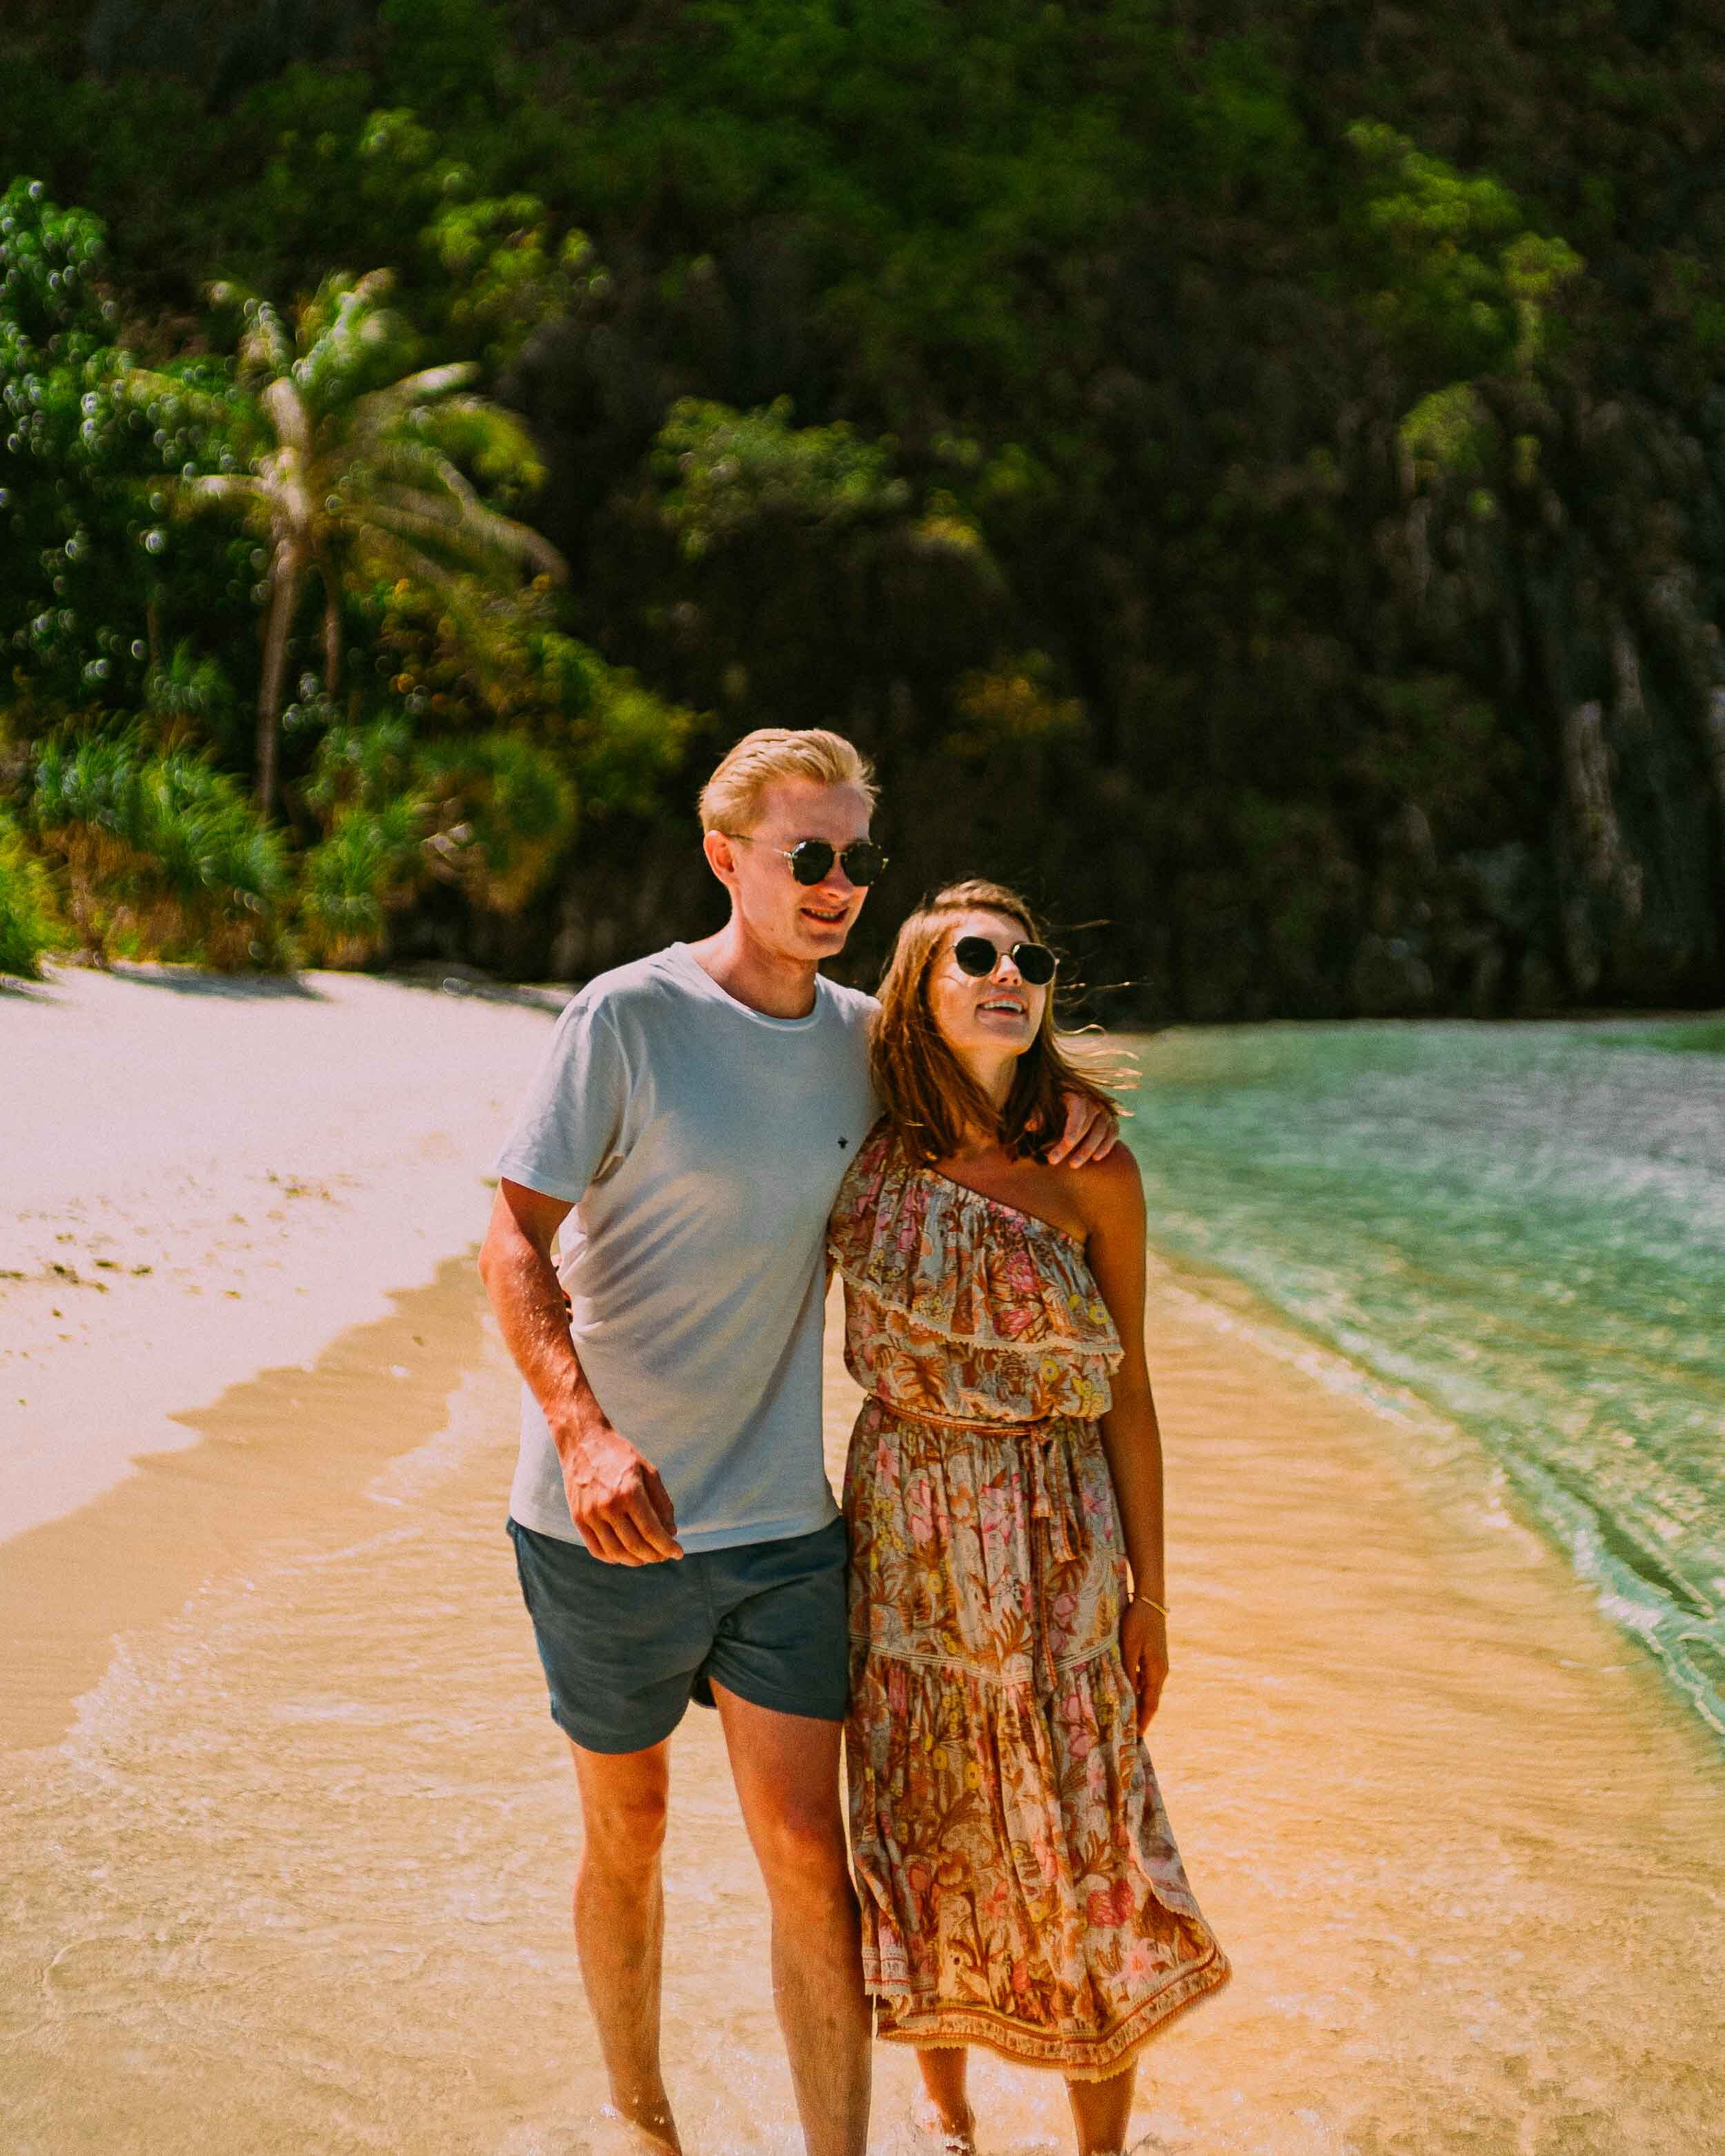 22 El Nido Philippines Couple Photography Honeymoon portraits in Palawan, March 2020. Travel couple photography in Southeast Asia x @hejguj.jpg